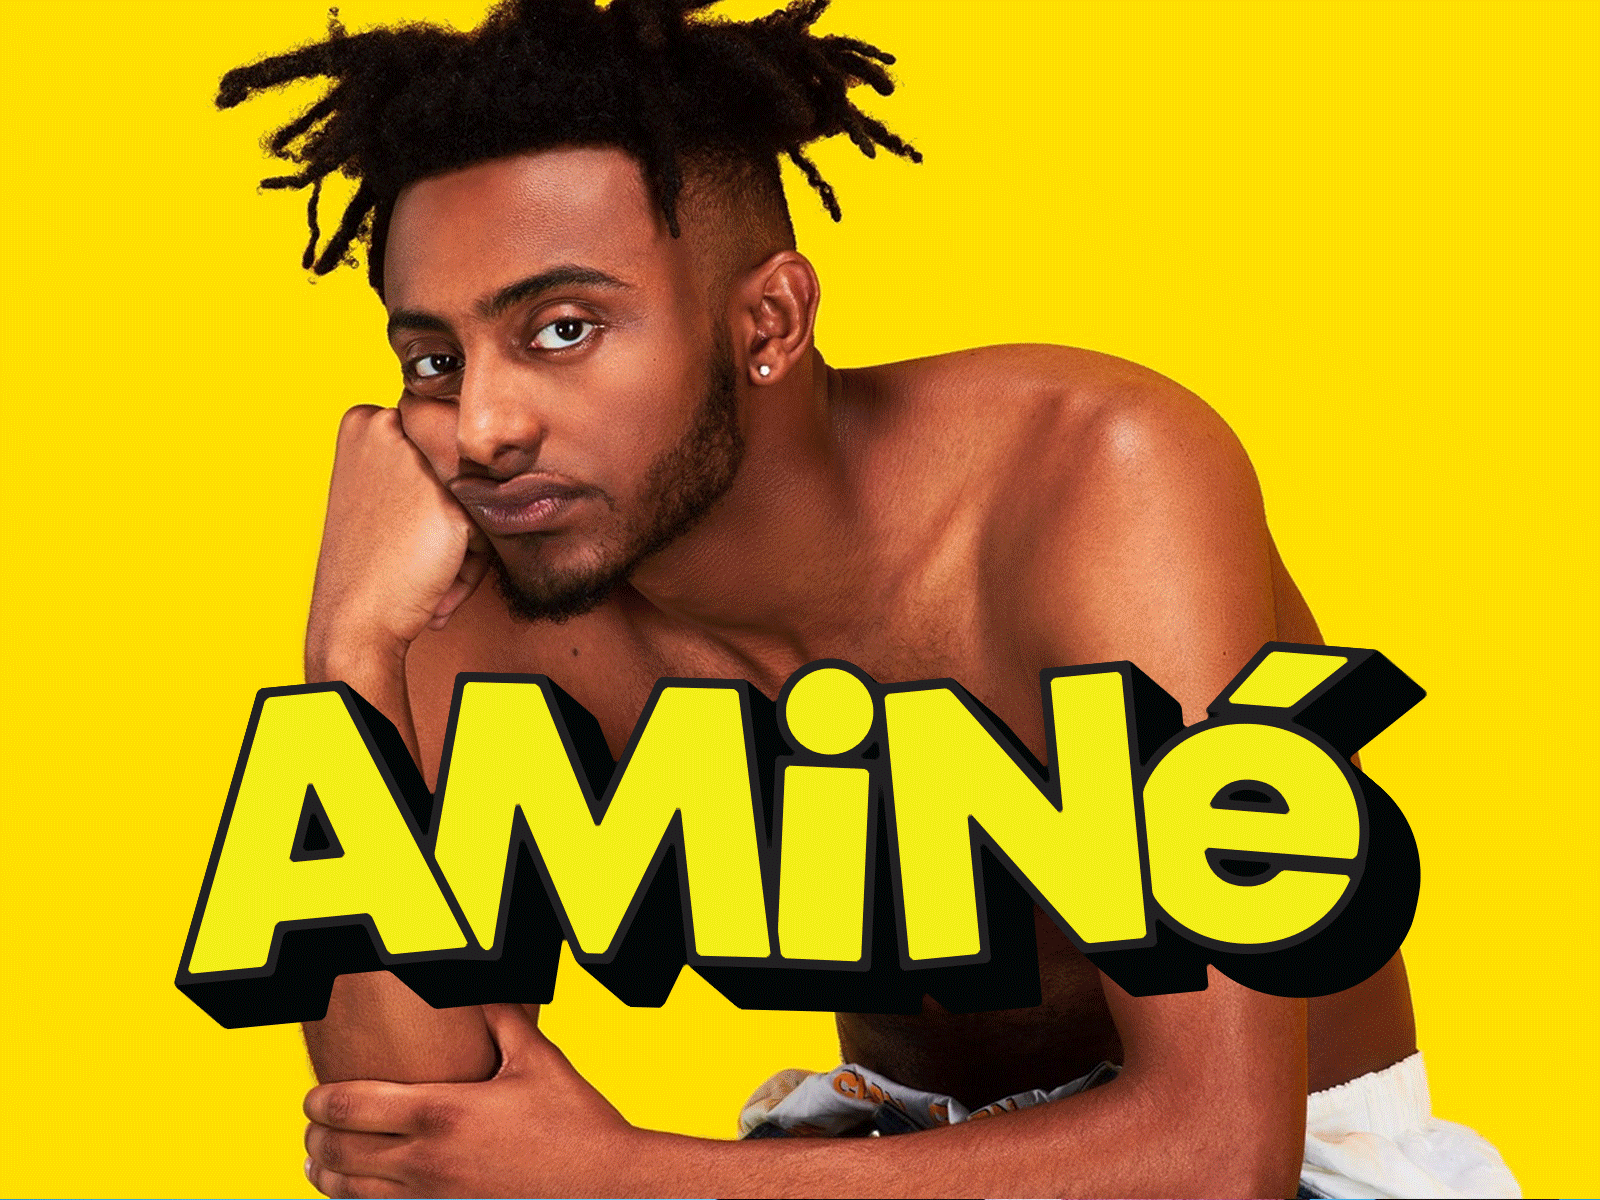 Watch Aminé Rate Boy Bands, Nude Bicycling, and Wardrobe Malfunctions |  Video | Pitchfork